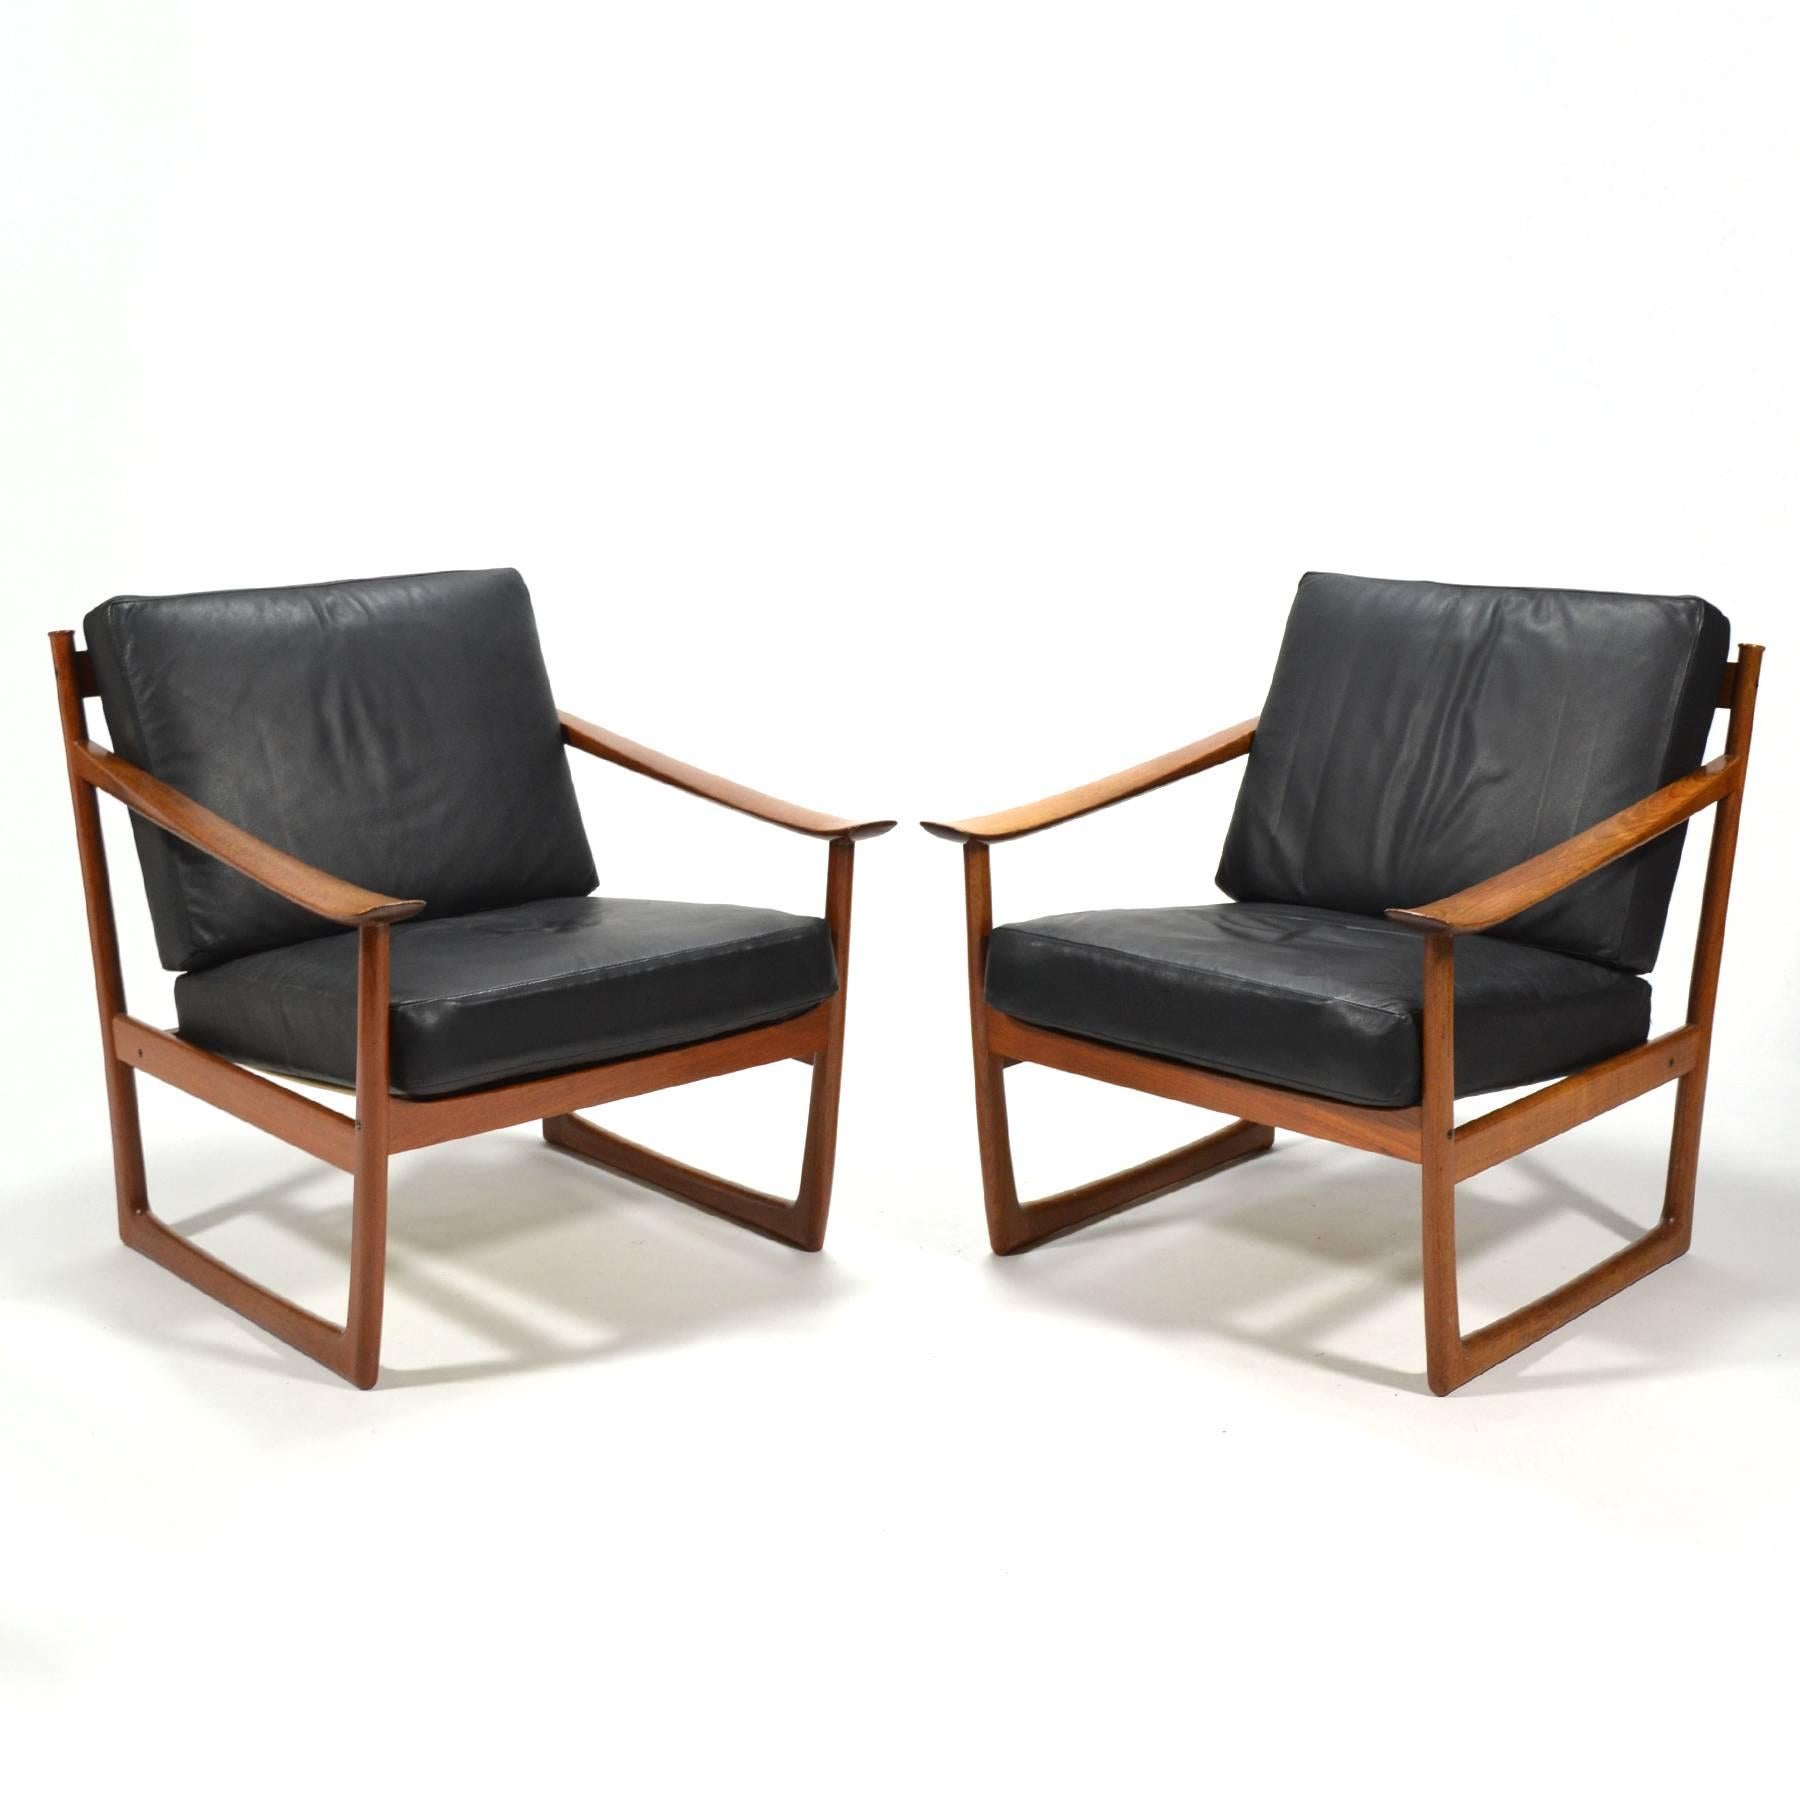 This beautiful pair of model FD 130 lounge chairs by Peter Hvidt & Orla Mølgaard Nielsen are crafted of solid teak and have several wonderful design details. The sled base is stabile on any floor, and the broad, flared arms feel wonderful in your